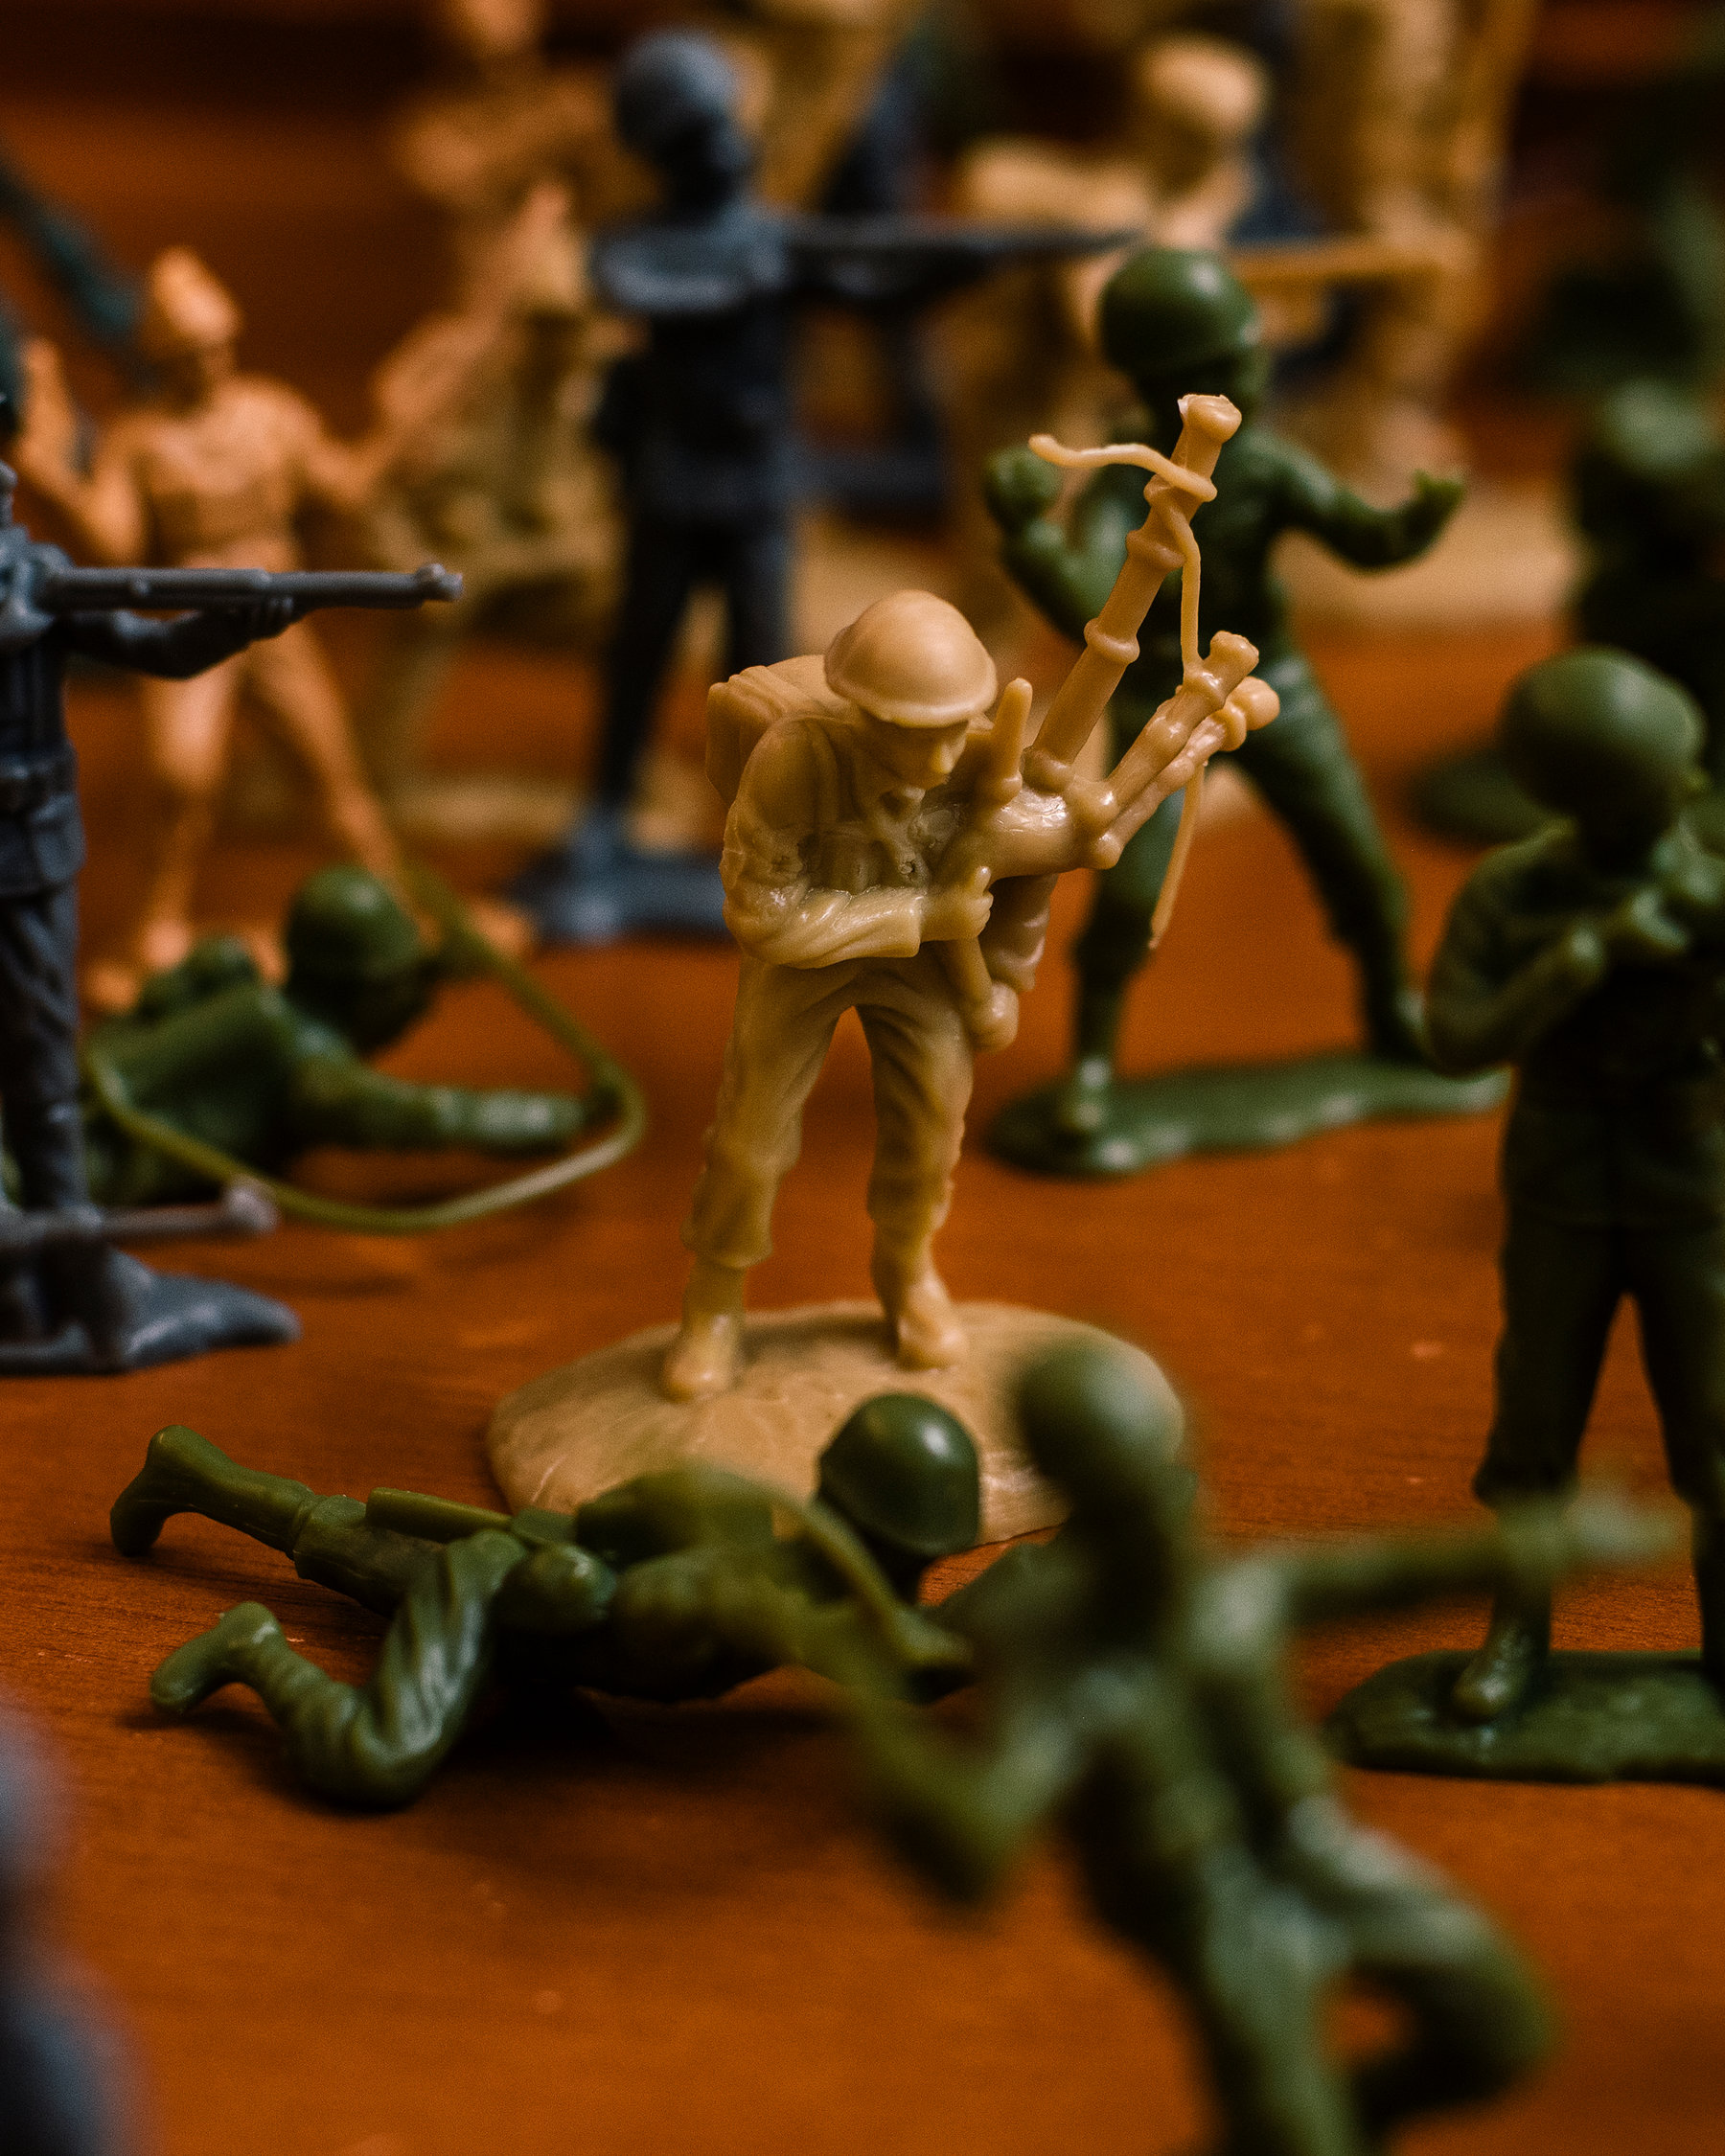 A Year Old Asks Why There Are No Female Toy Soldiers Now